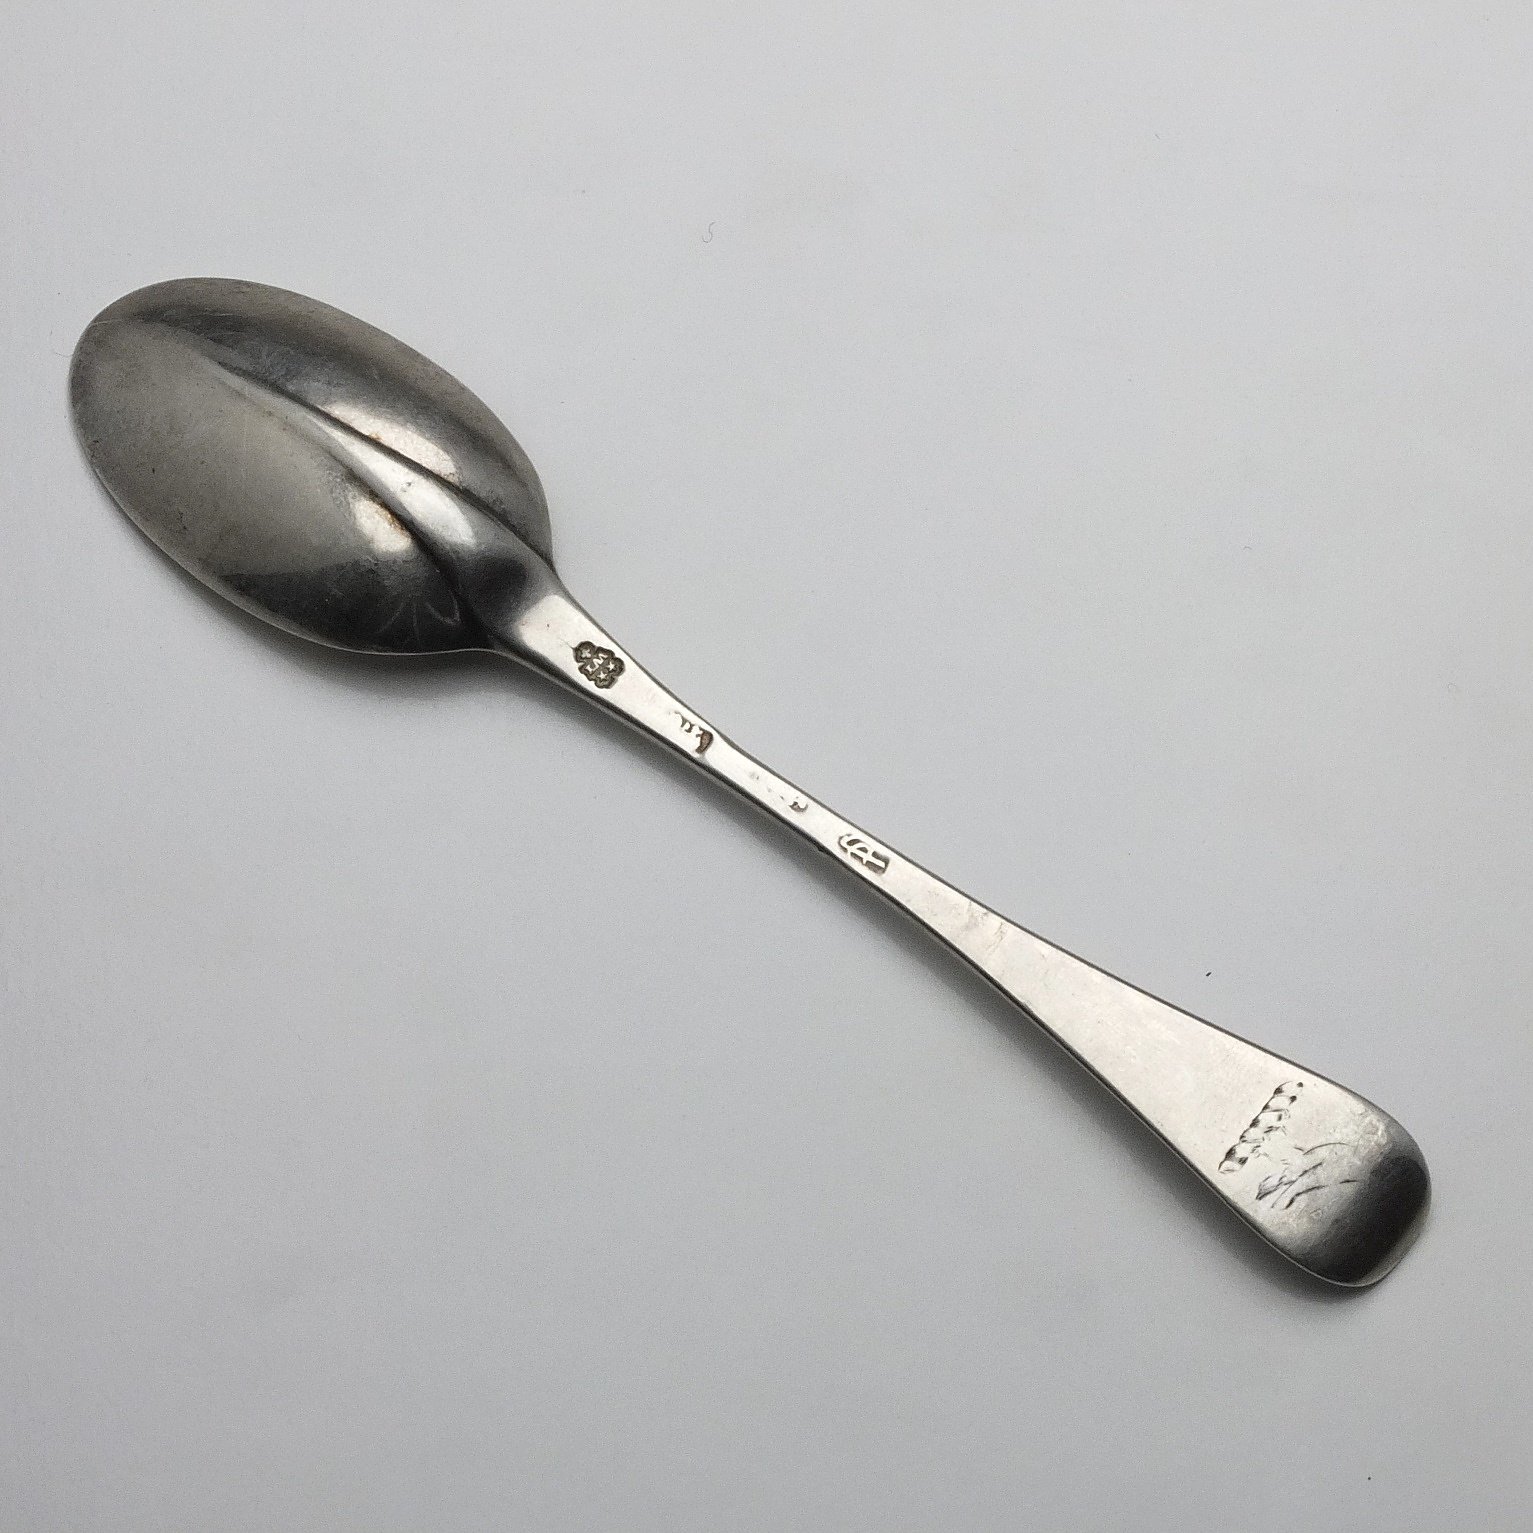 'George I Crested Sterling Silver Spoon David Willaume London 1714'